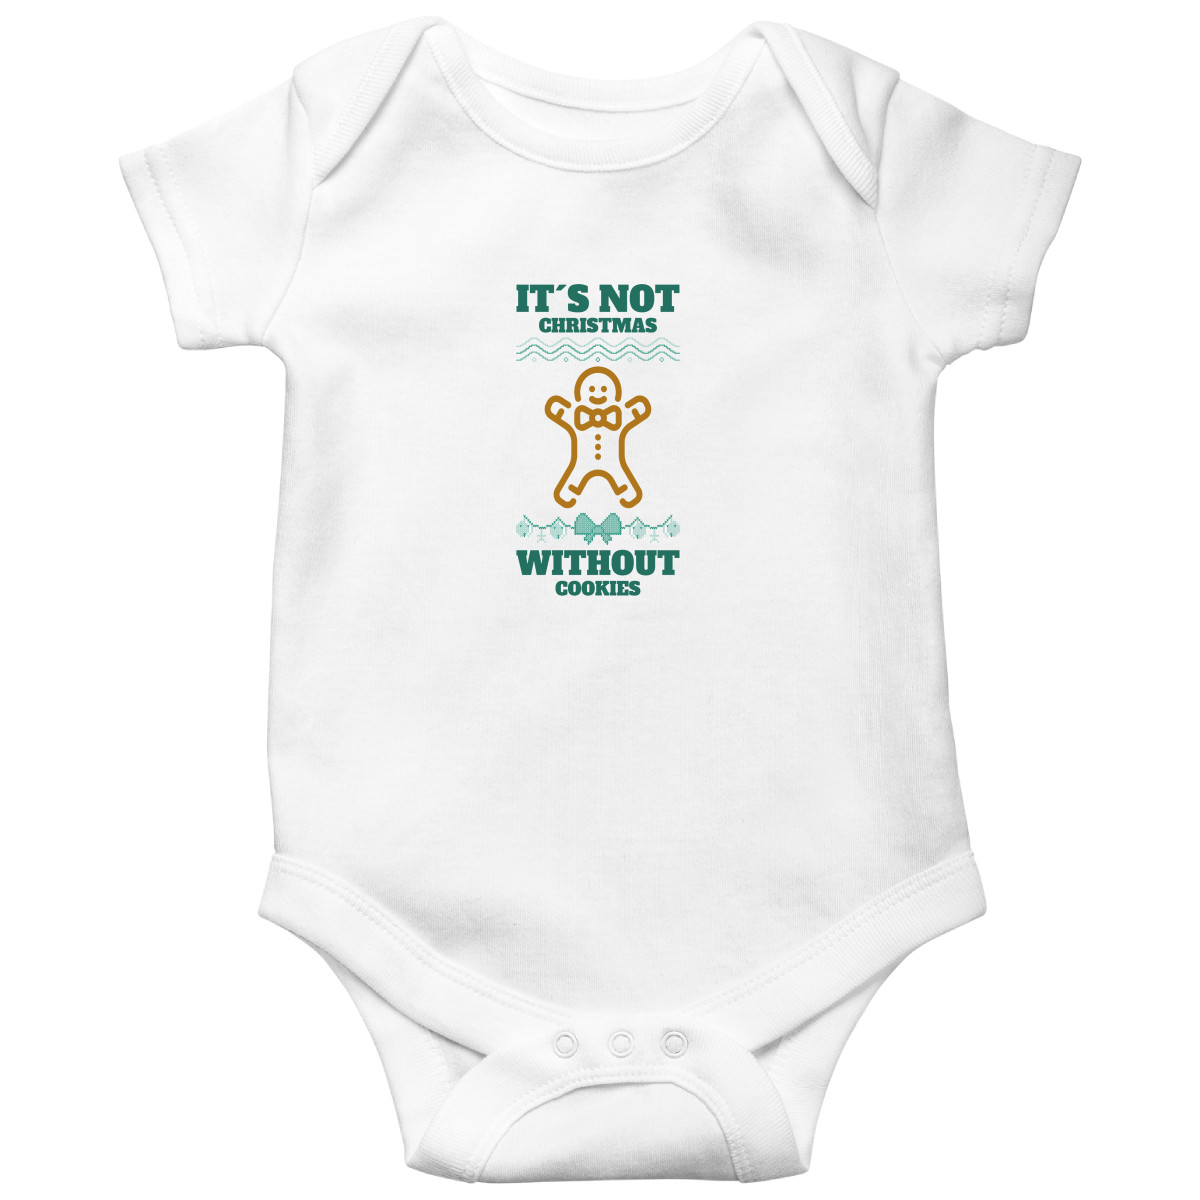 It's Not Christmas Without Cookies Baby Bodysuits